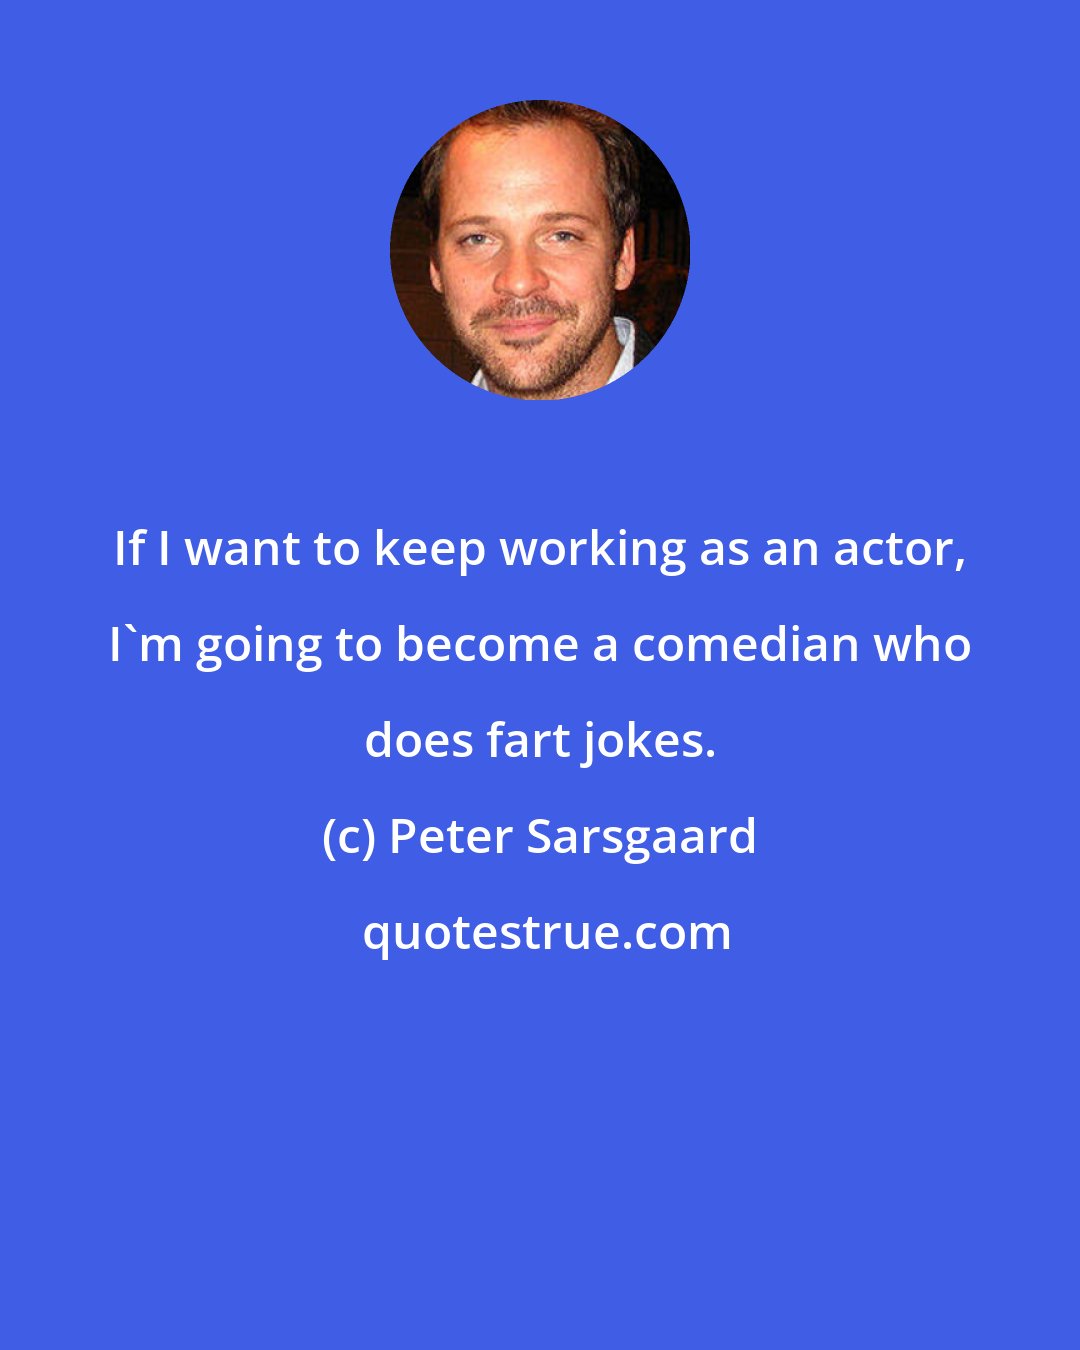 Peter Sarsgaard: If I want to keep working as an actor, I'm going to become a comedian who does fart jokes.